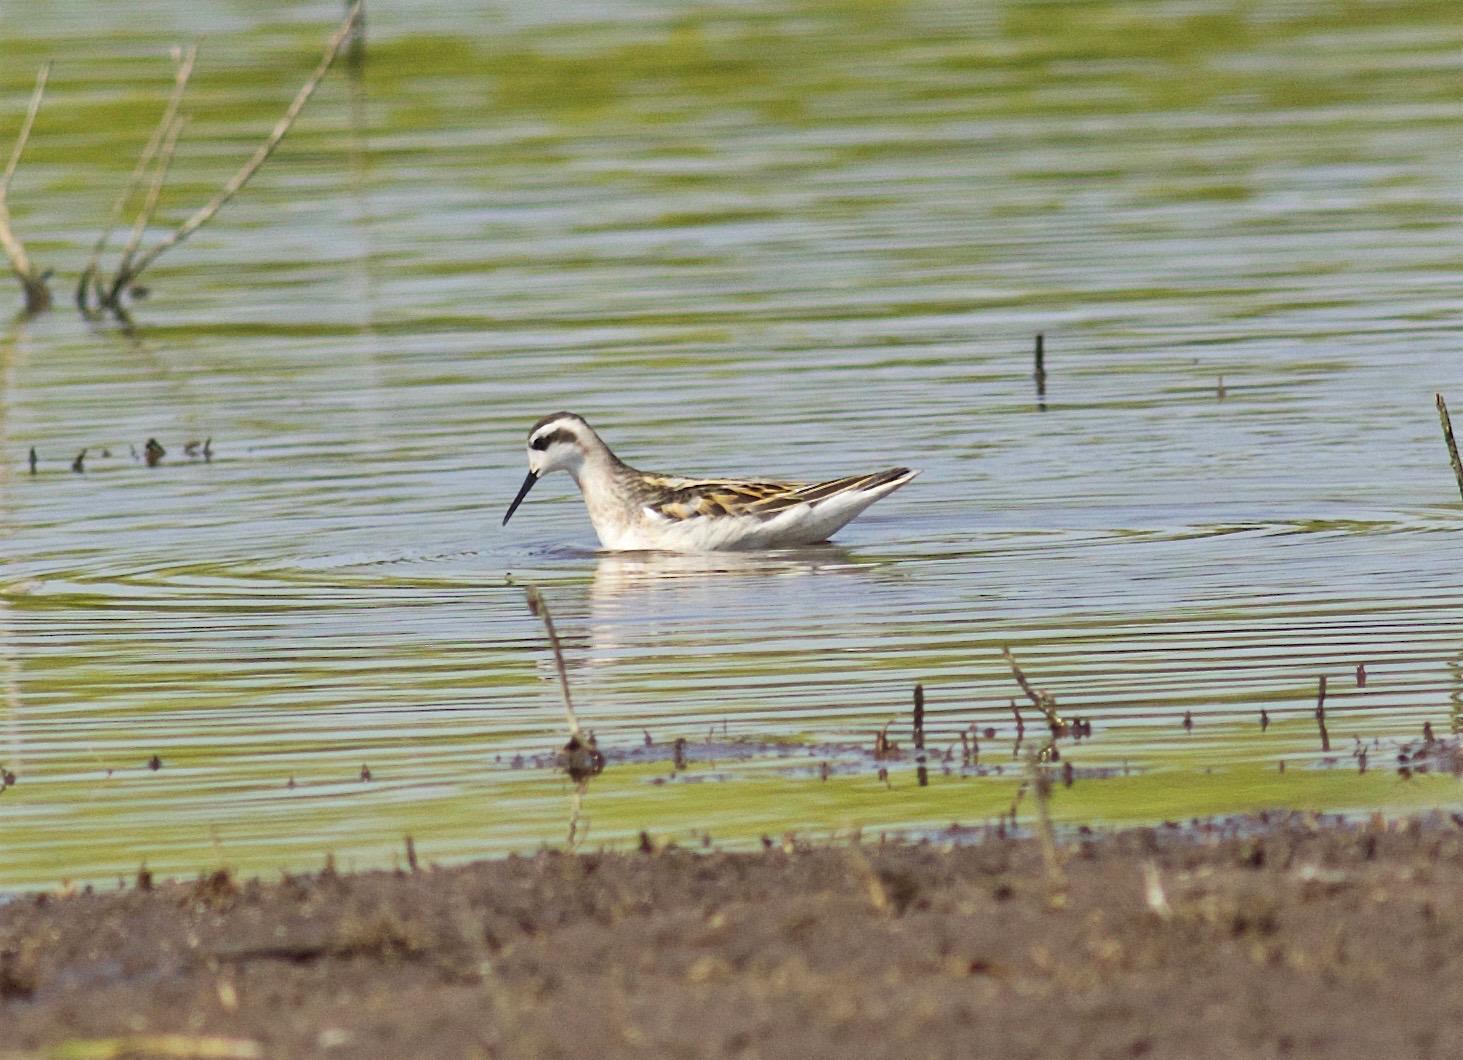 Red-necked Phalarope Photo by Kathryn Keith